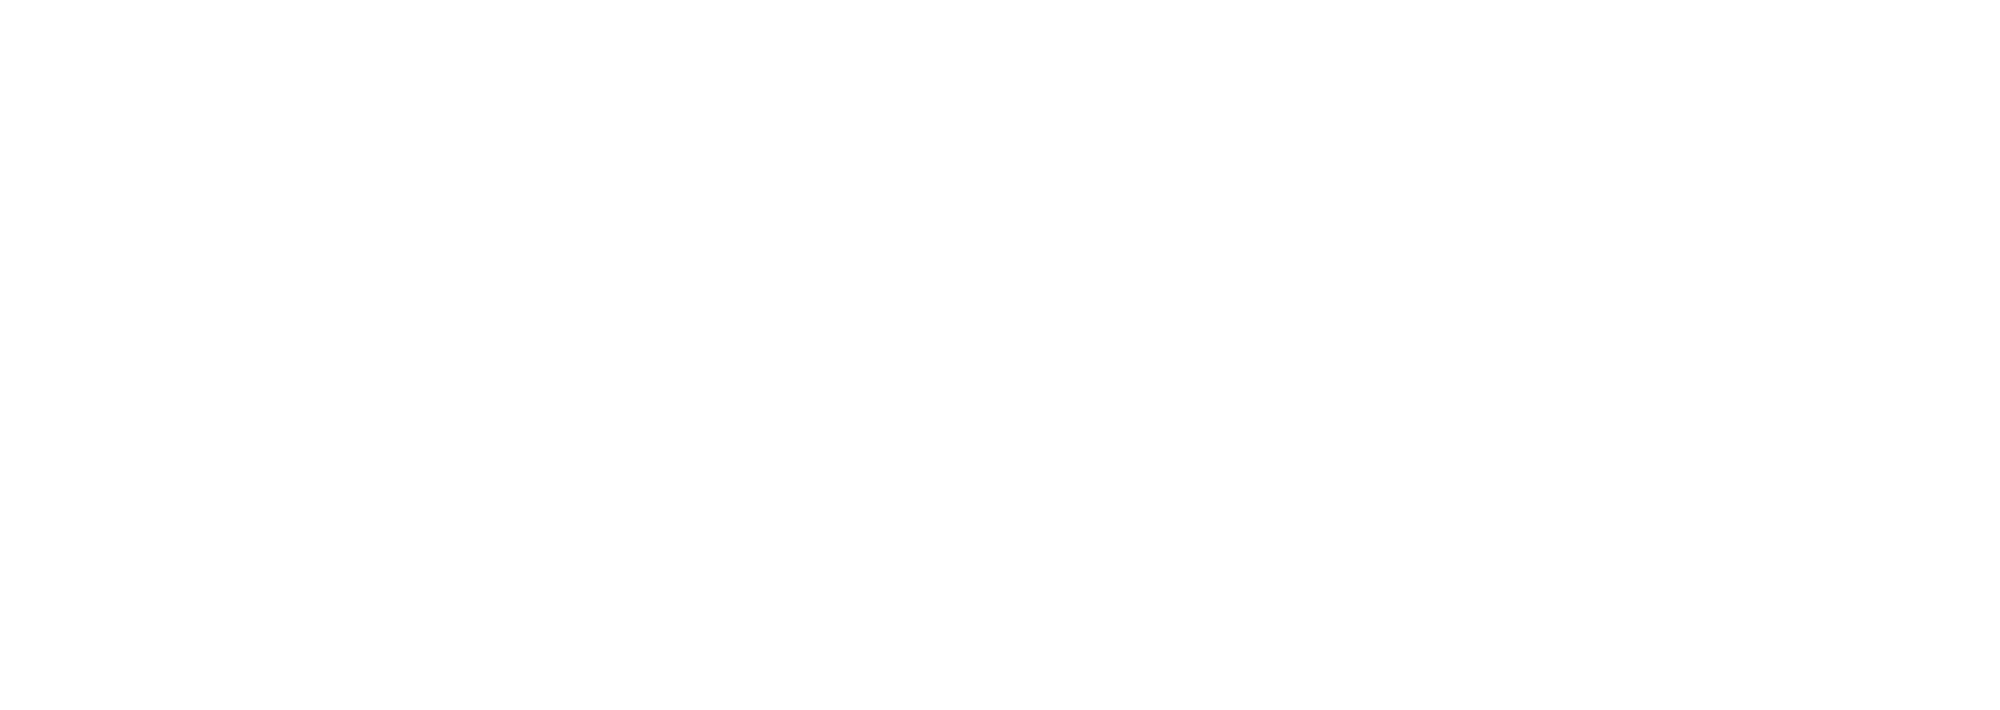 The DOMUS GROUP